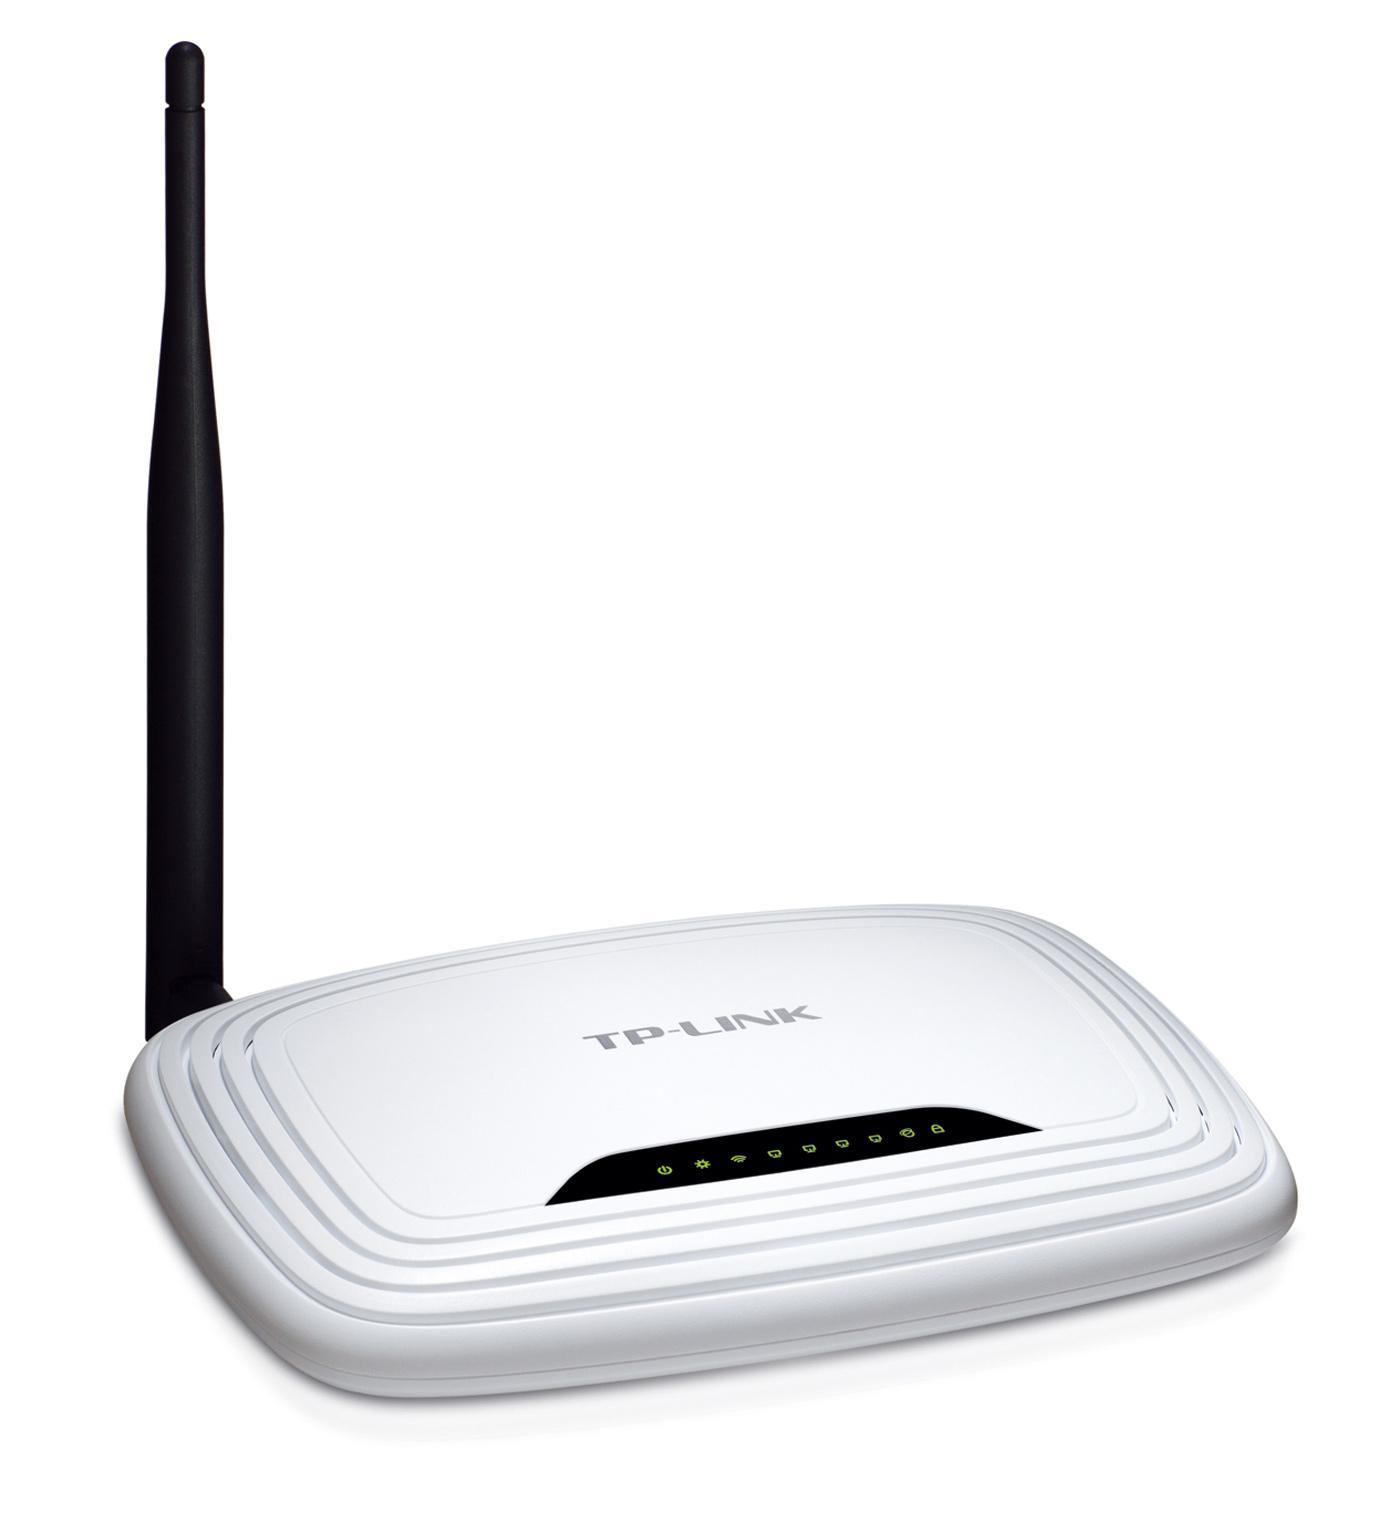 Tp-link Wireless Lite N Router Wr740n User Manual